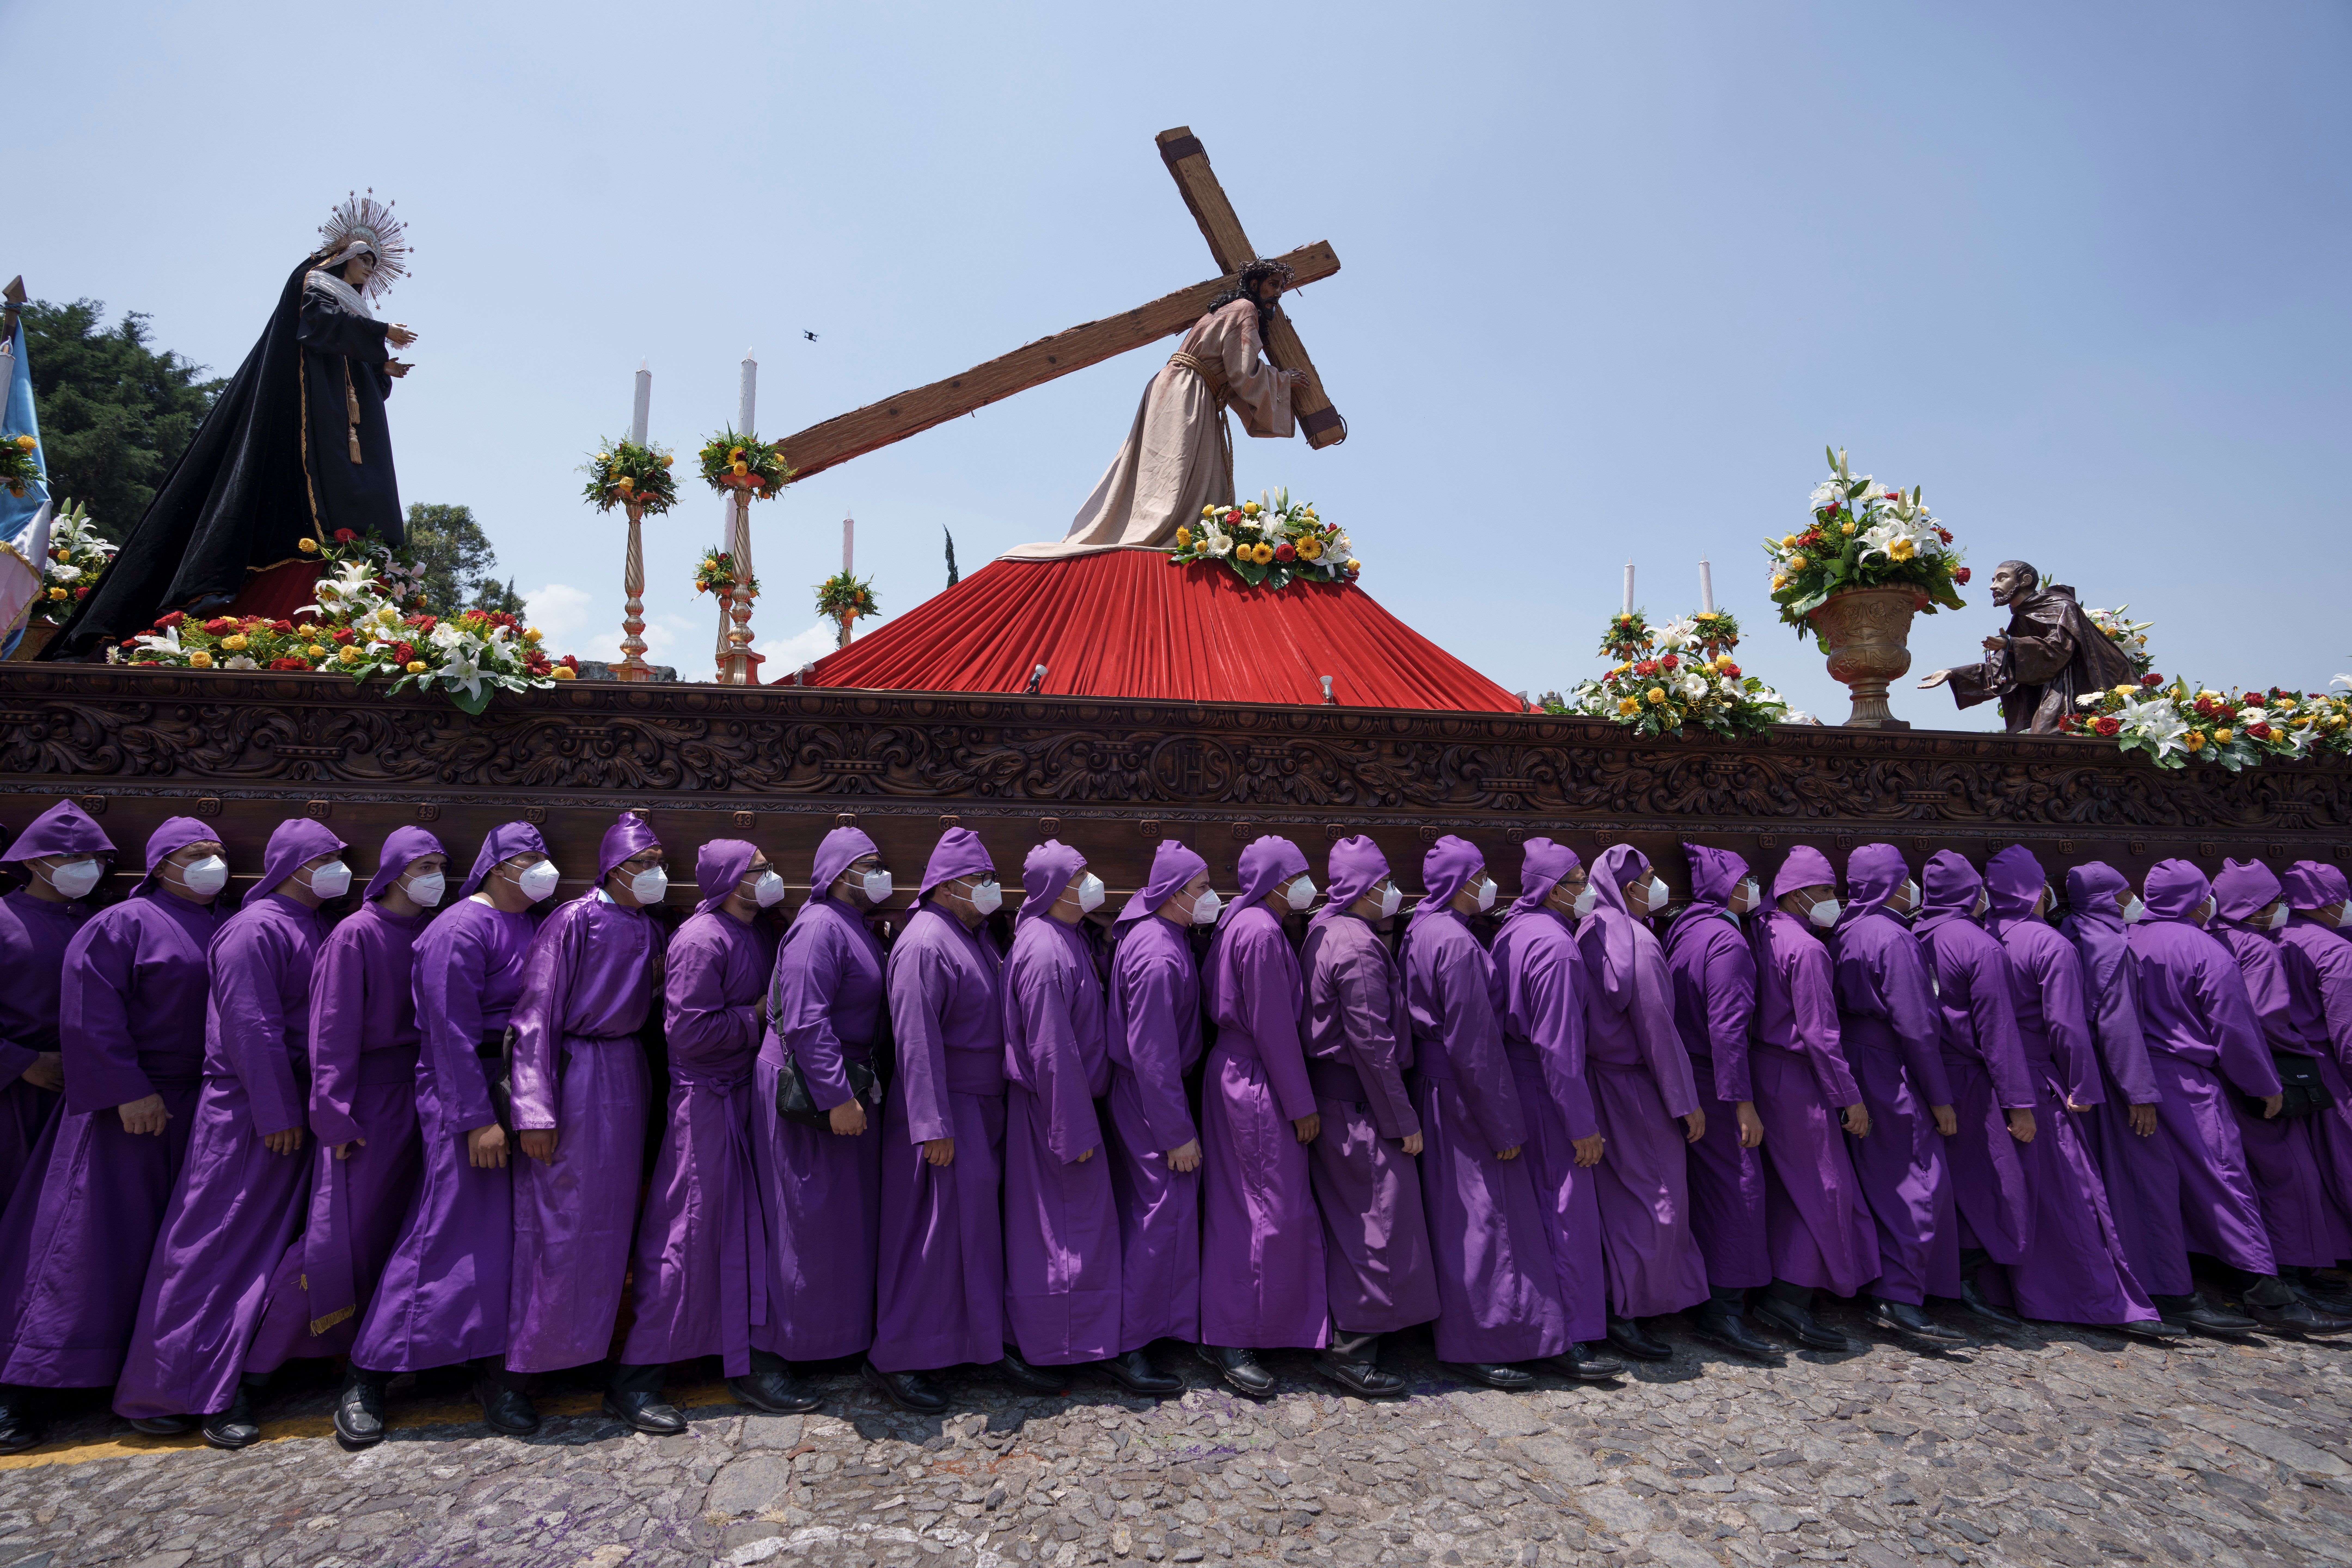 "Cucuruchos" carry a statue of Jesus Christ on a religious float during a Holy Thursday procession, in Antigua, Guatemala